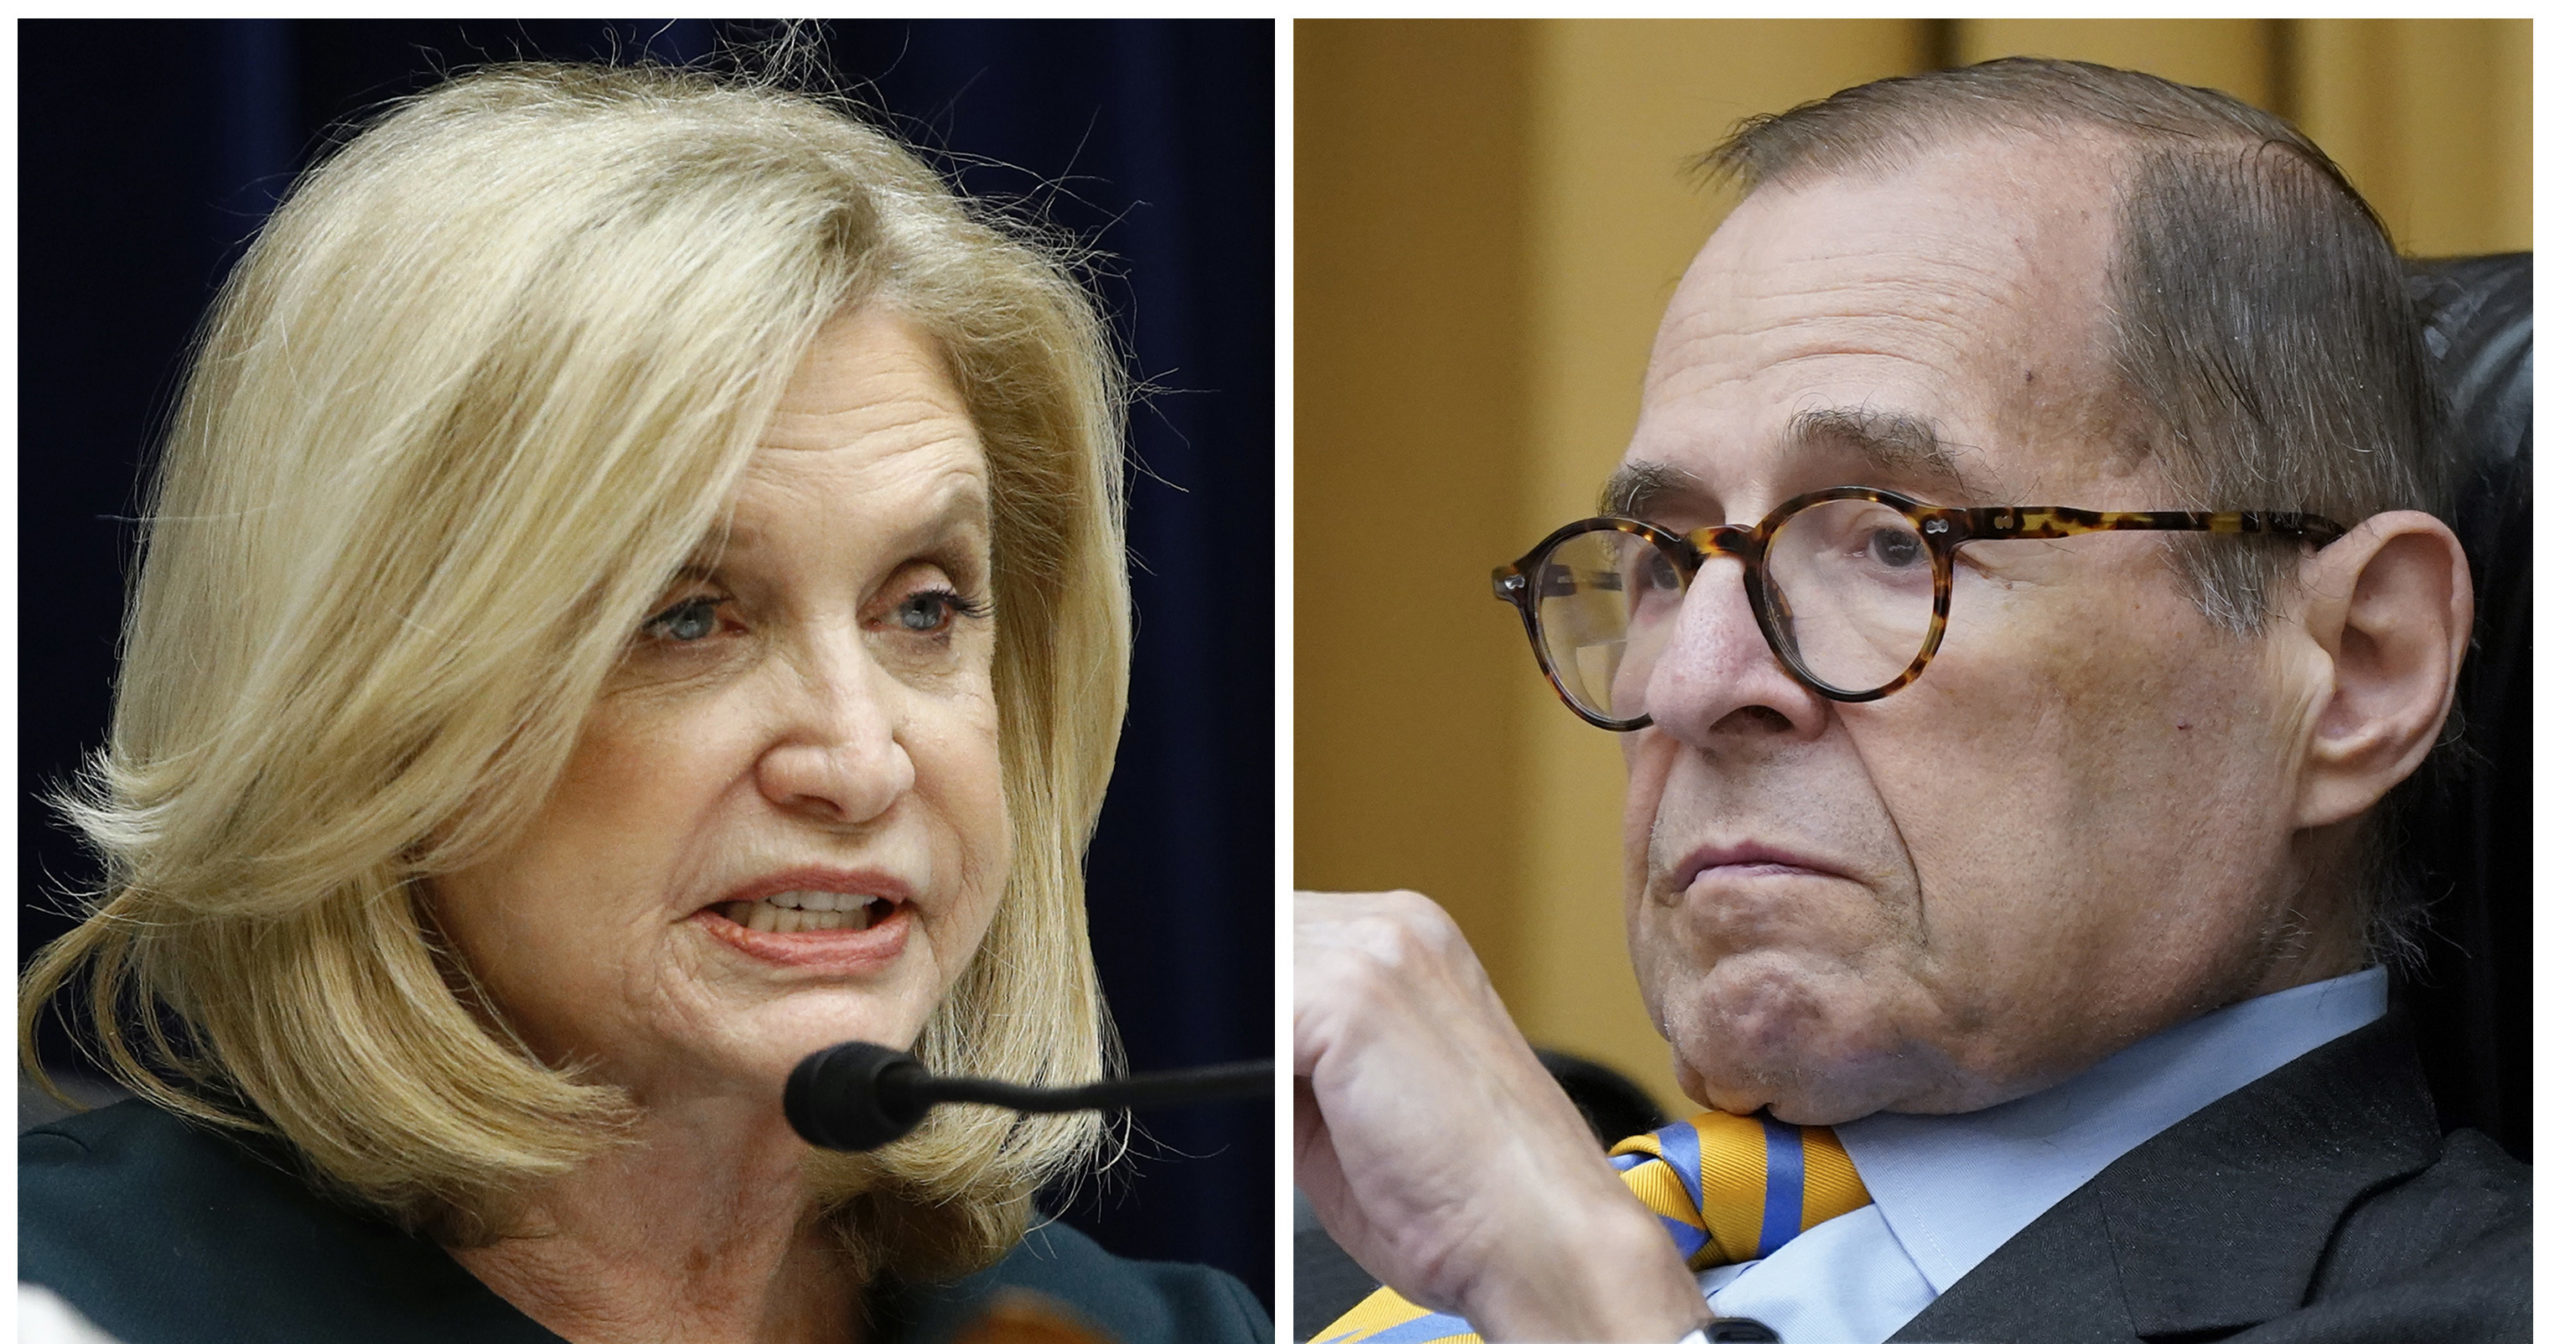 Rep. Carolyn Maloney, left, speaks on Capitol Hill in Washington, D.C., on March 11, 2020. Rep. Jerry Nadler is seen at the Capitol on Thursday.